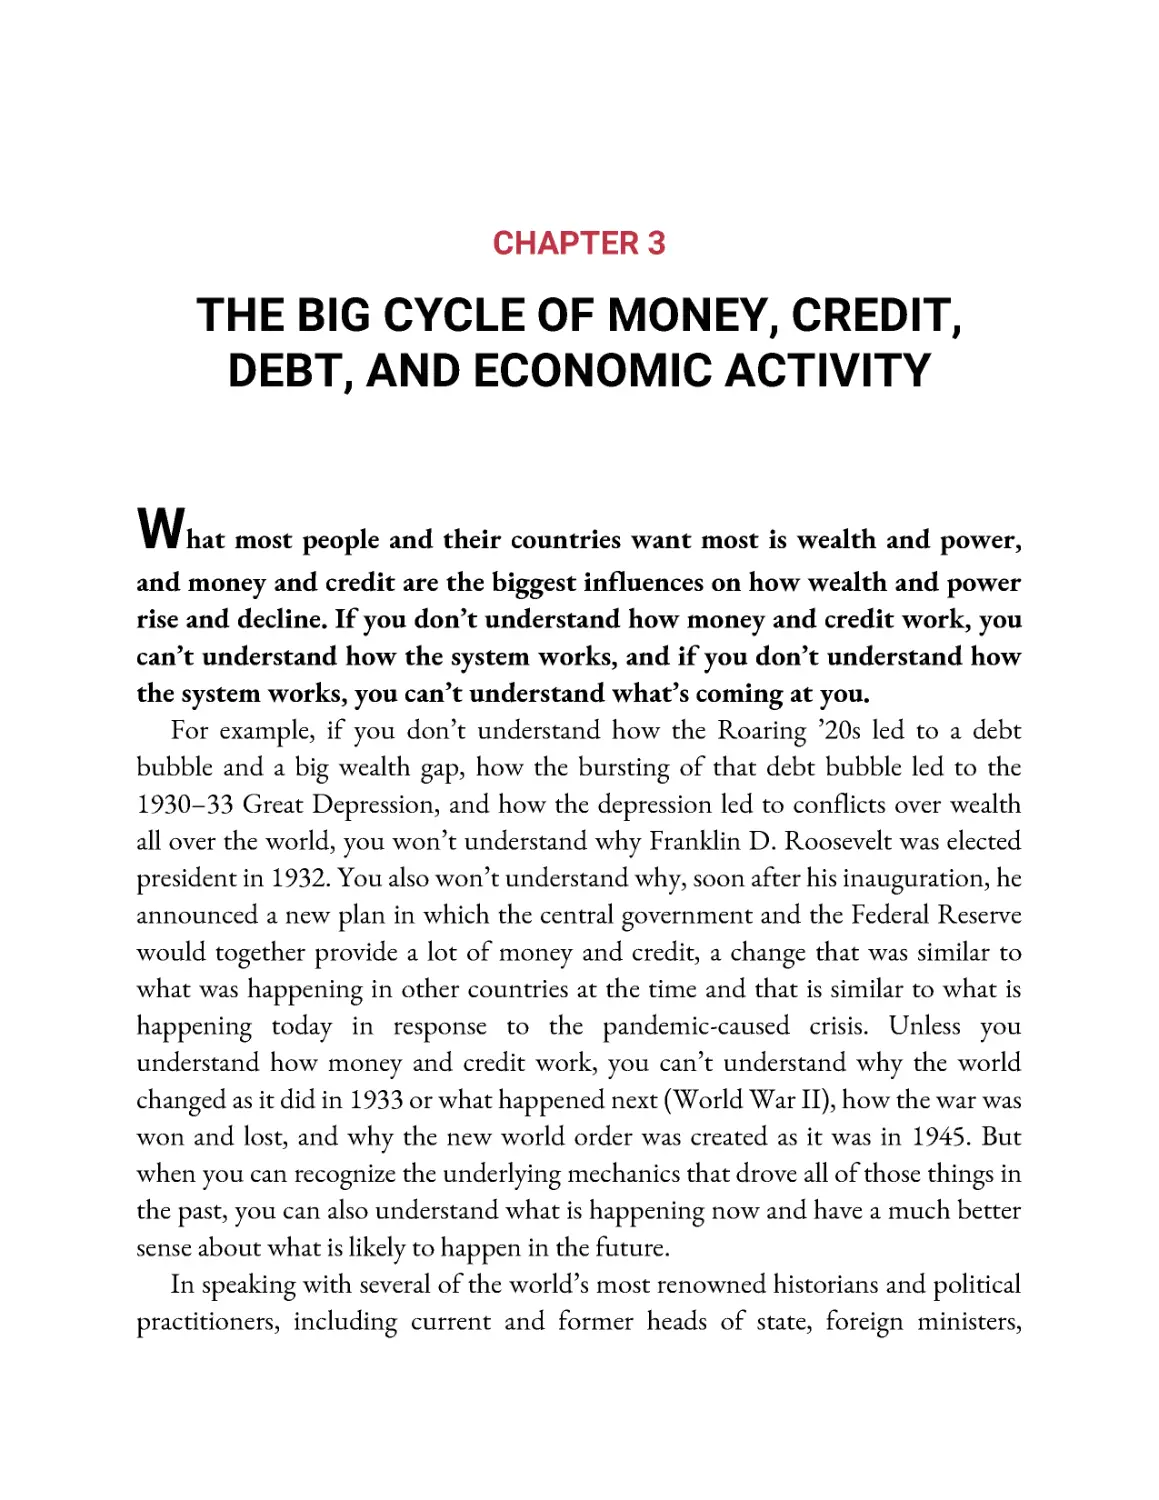 ﻿Chapter 3: The Big Cycle of Money, Credit, Debt, and Economic Activit